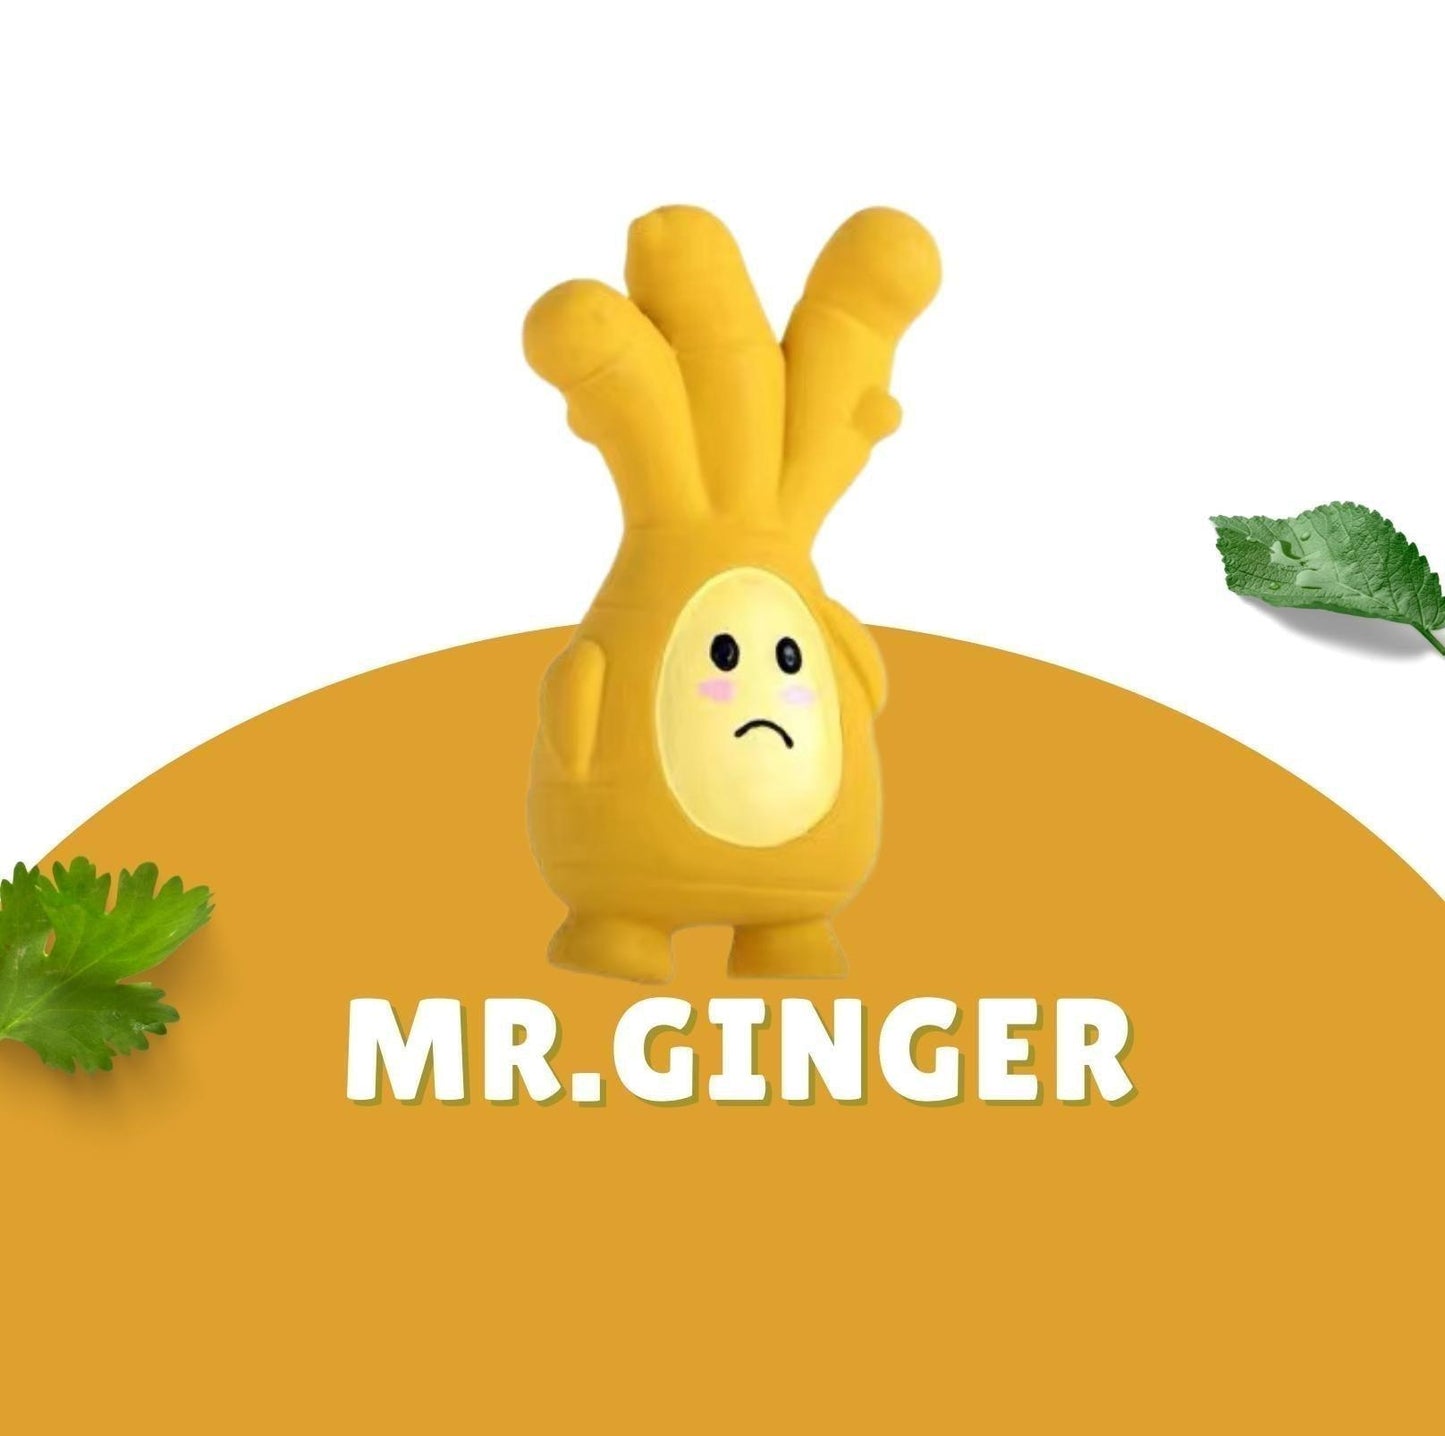 Q-Monster Dog Toy Chewing and Sounding - Mr. Spring Onion, Ginger and Garlic - {{product.type}} - PawPawUp